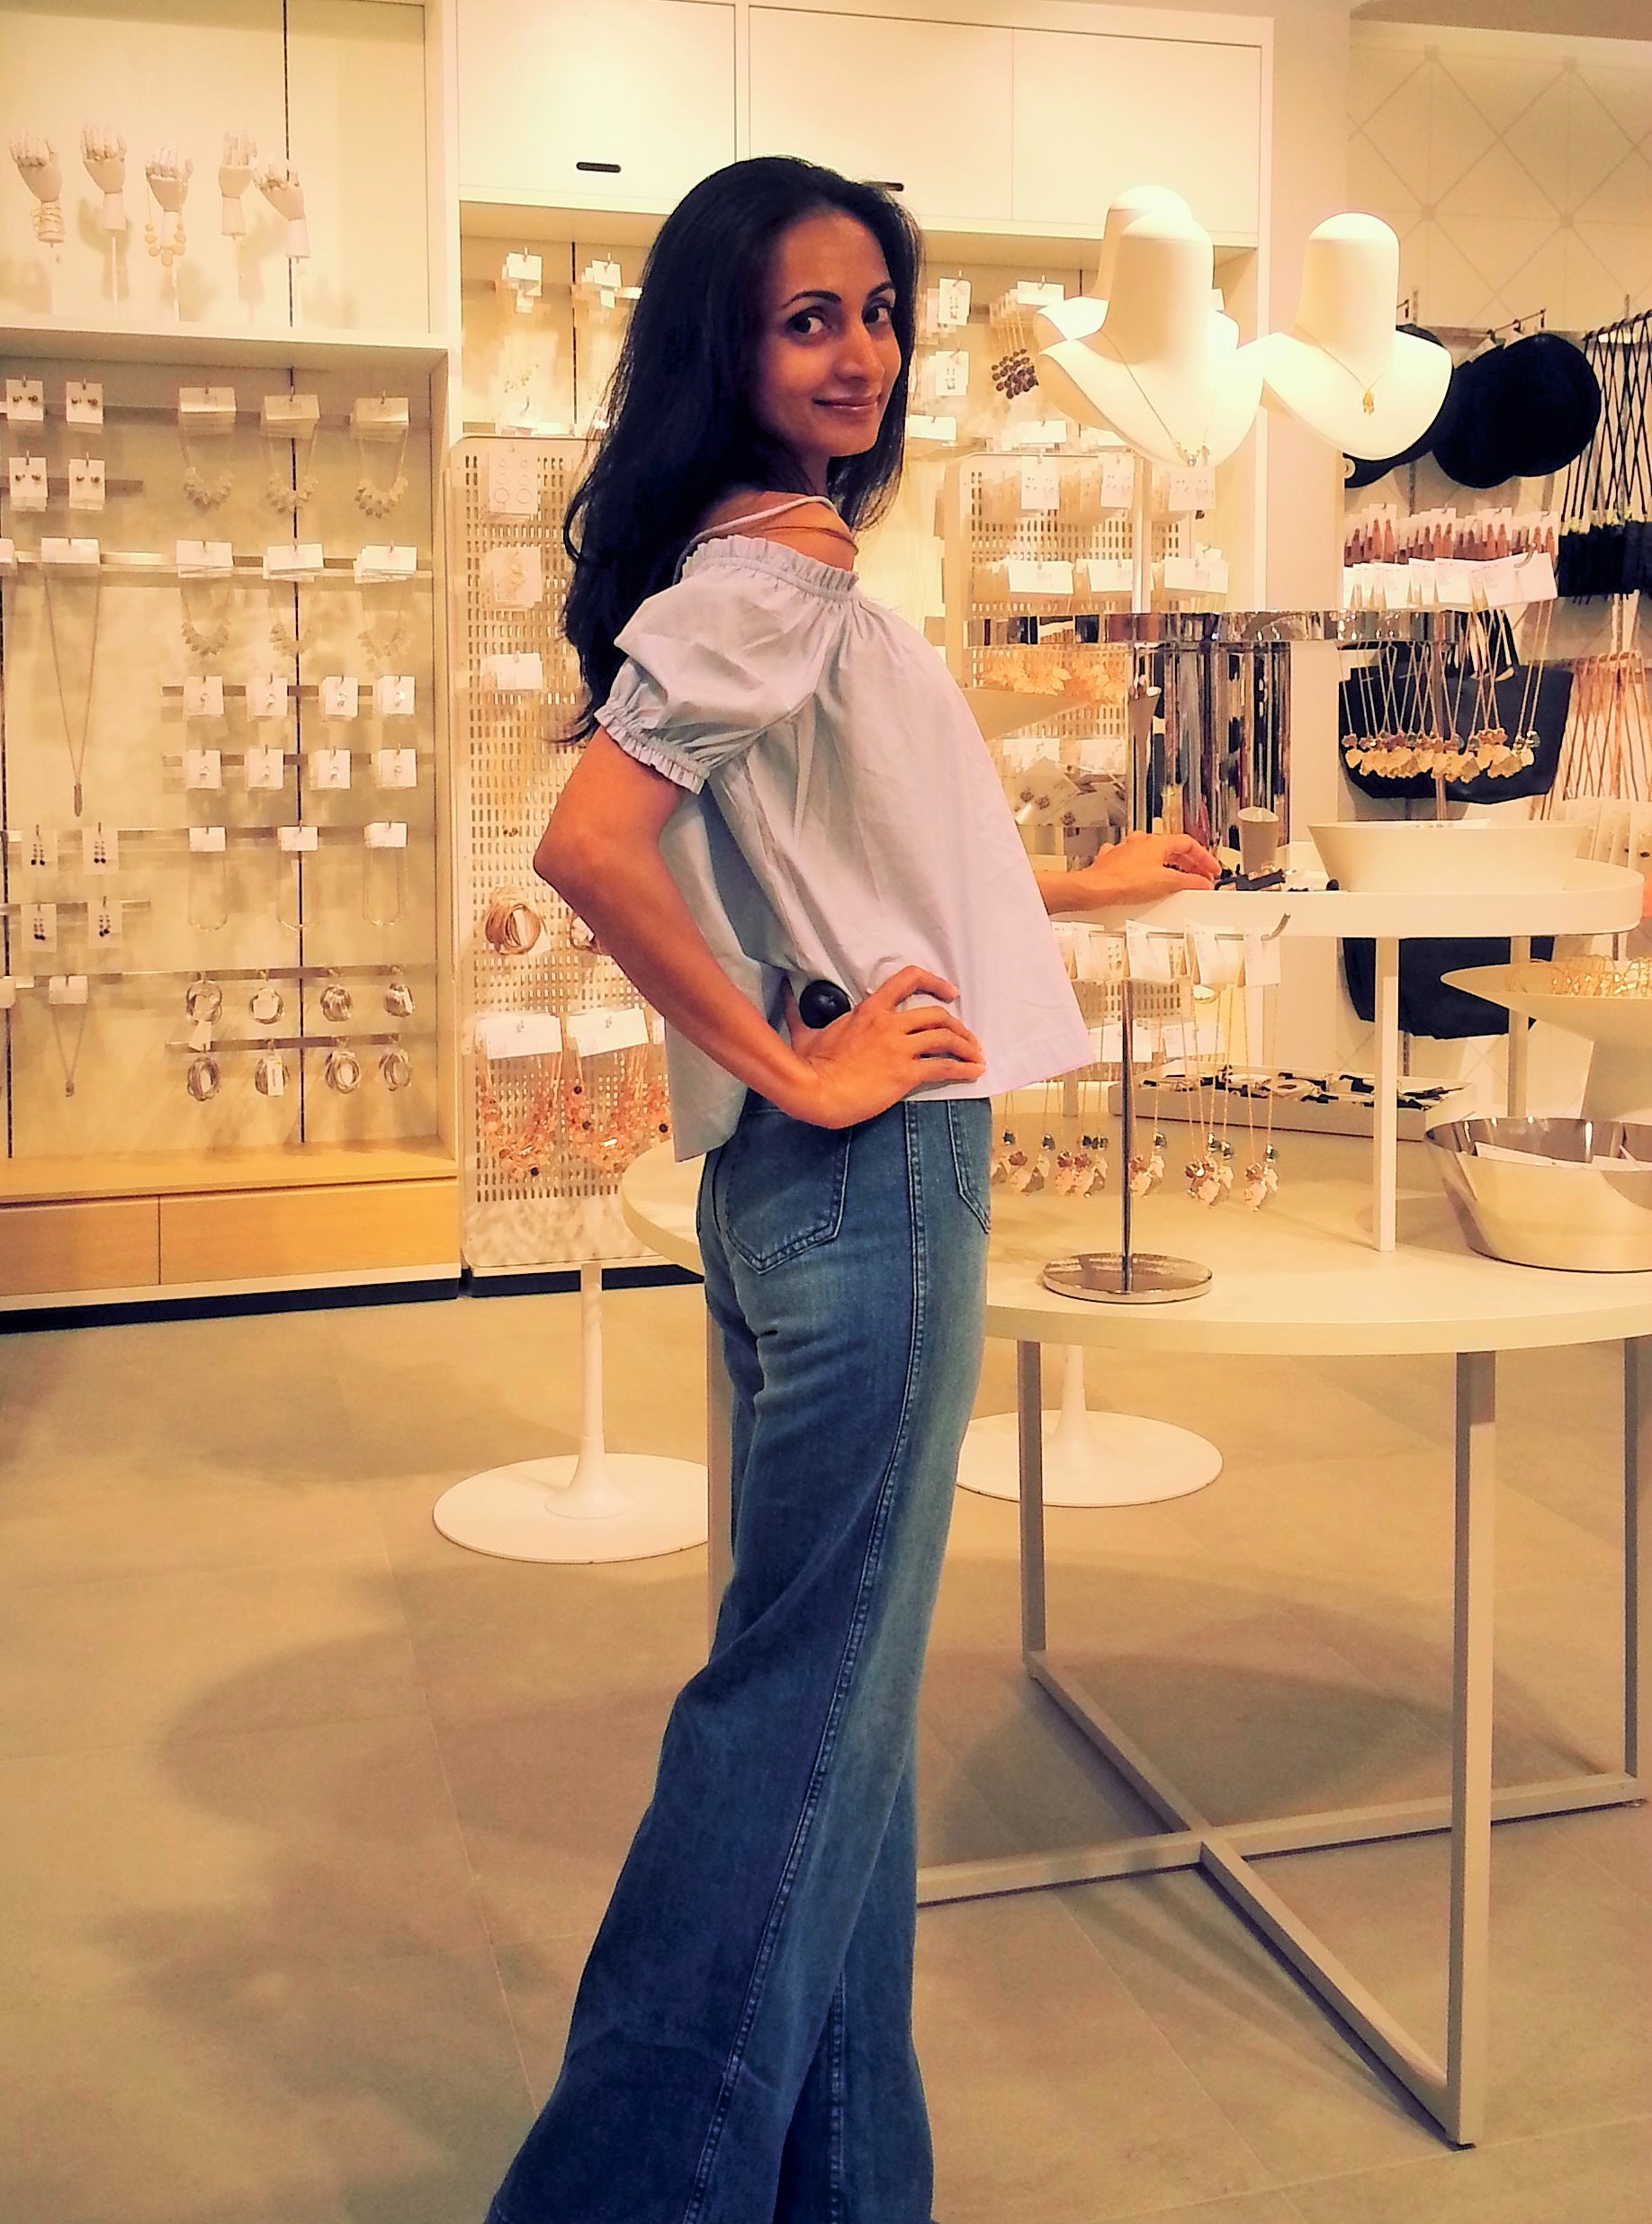 A Sneak Peek Into H&M’s First Store in Bangalore